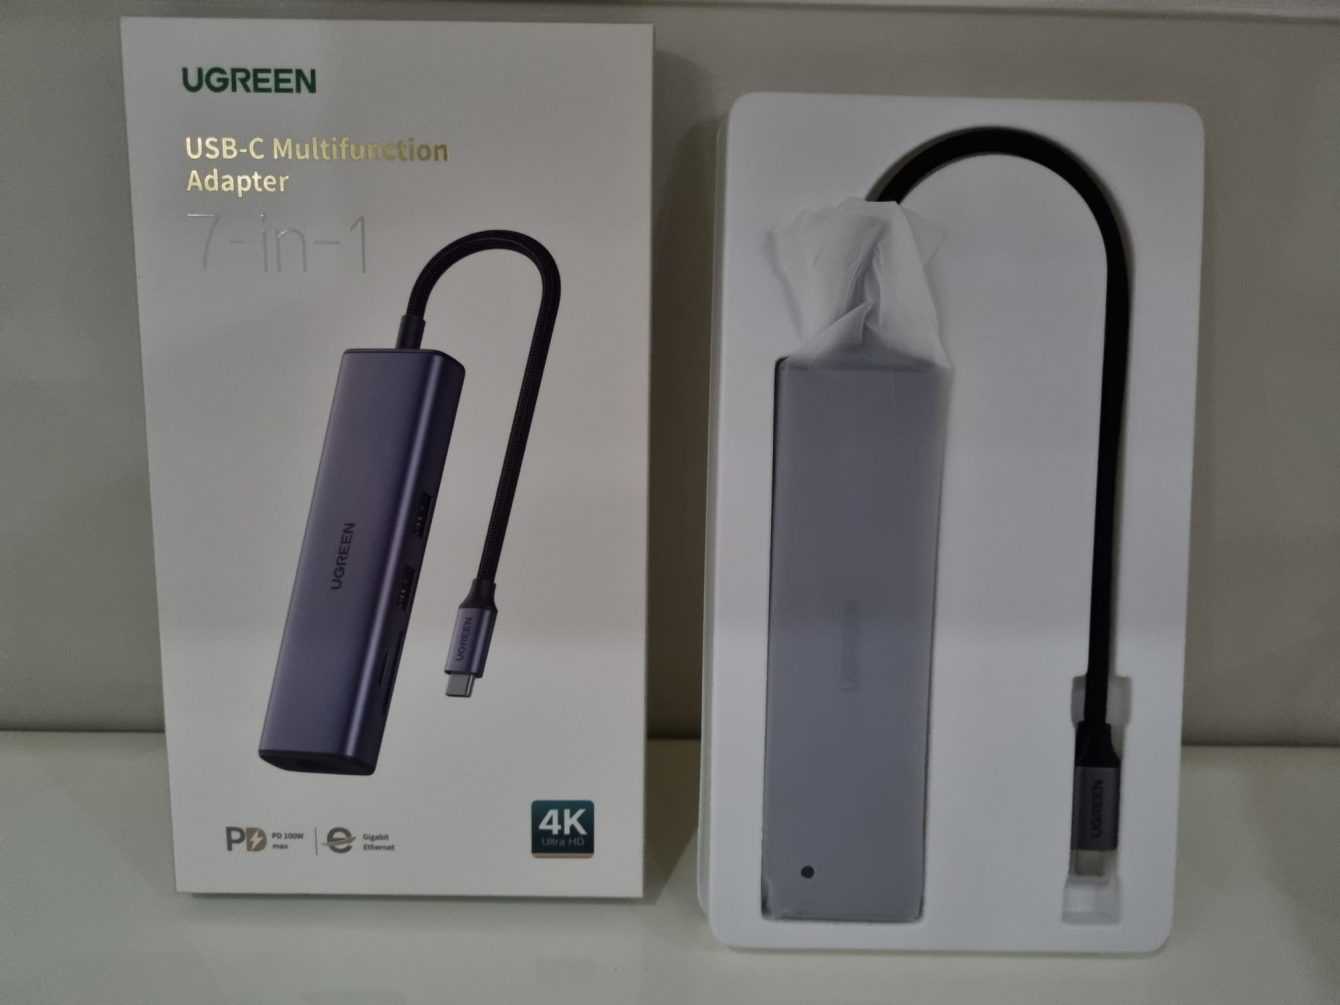 Review Ugreen USB-C Multifunction Adapter: 7 choices in 1 device